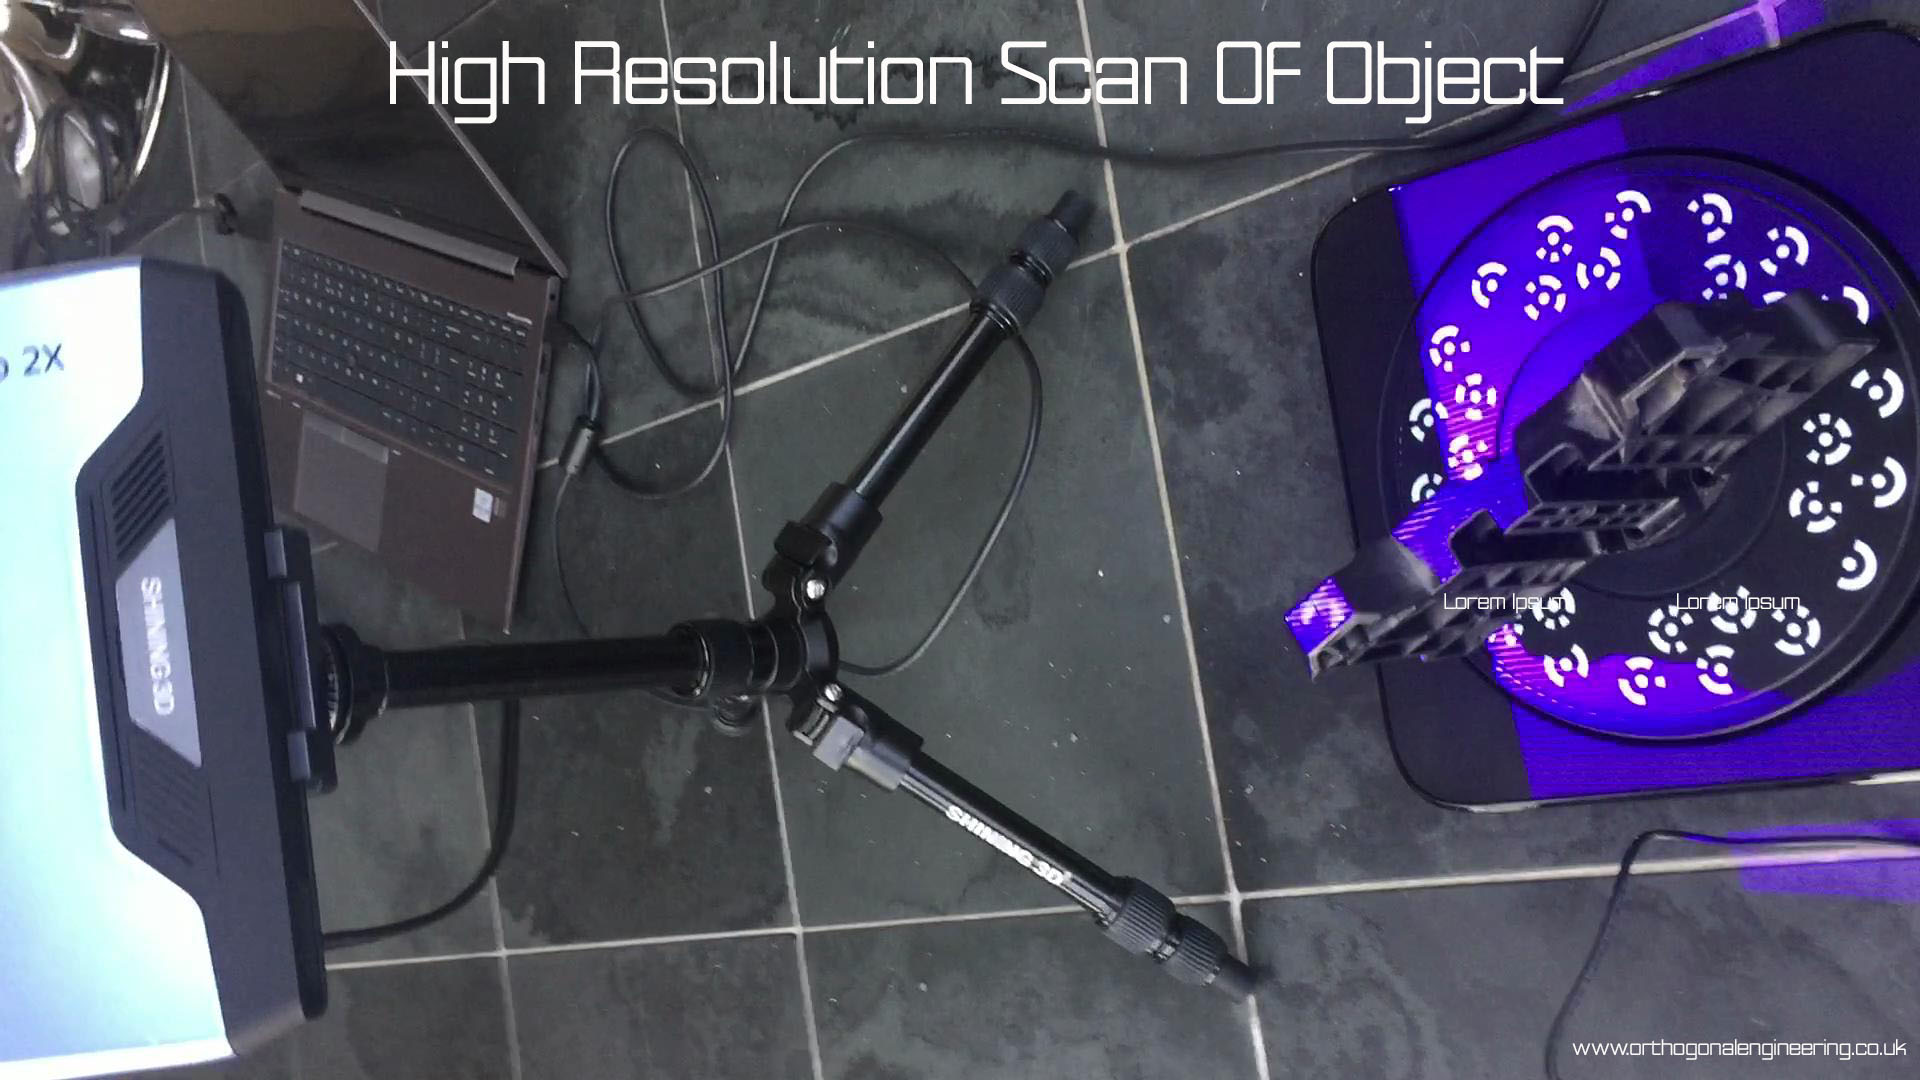 High Resolution scanner imaging a bracket which is mounted on a rotating turntable